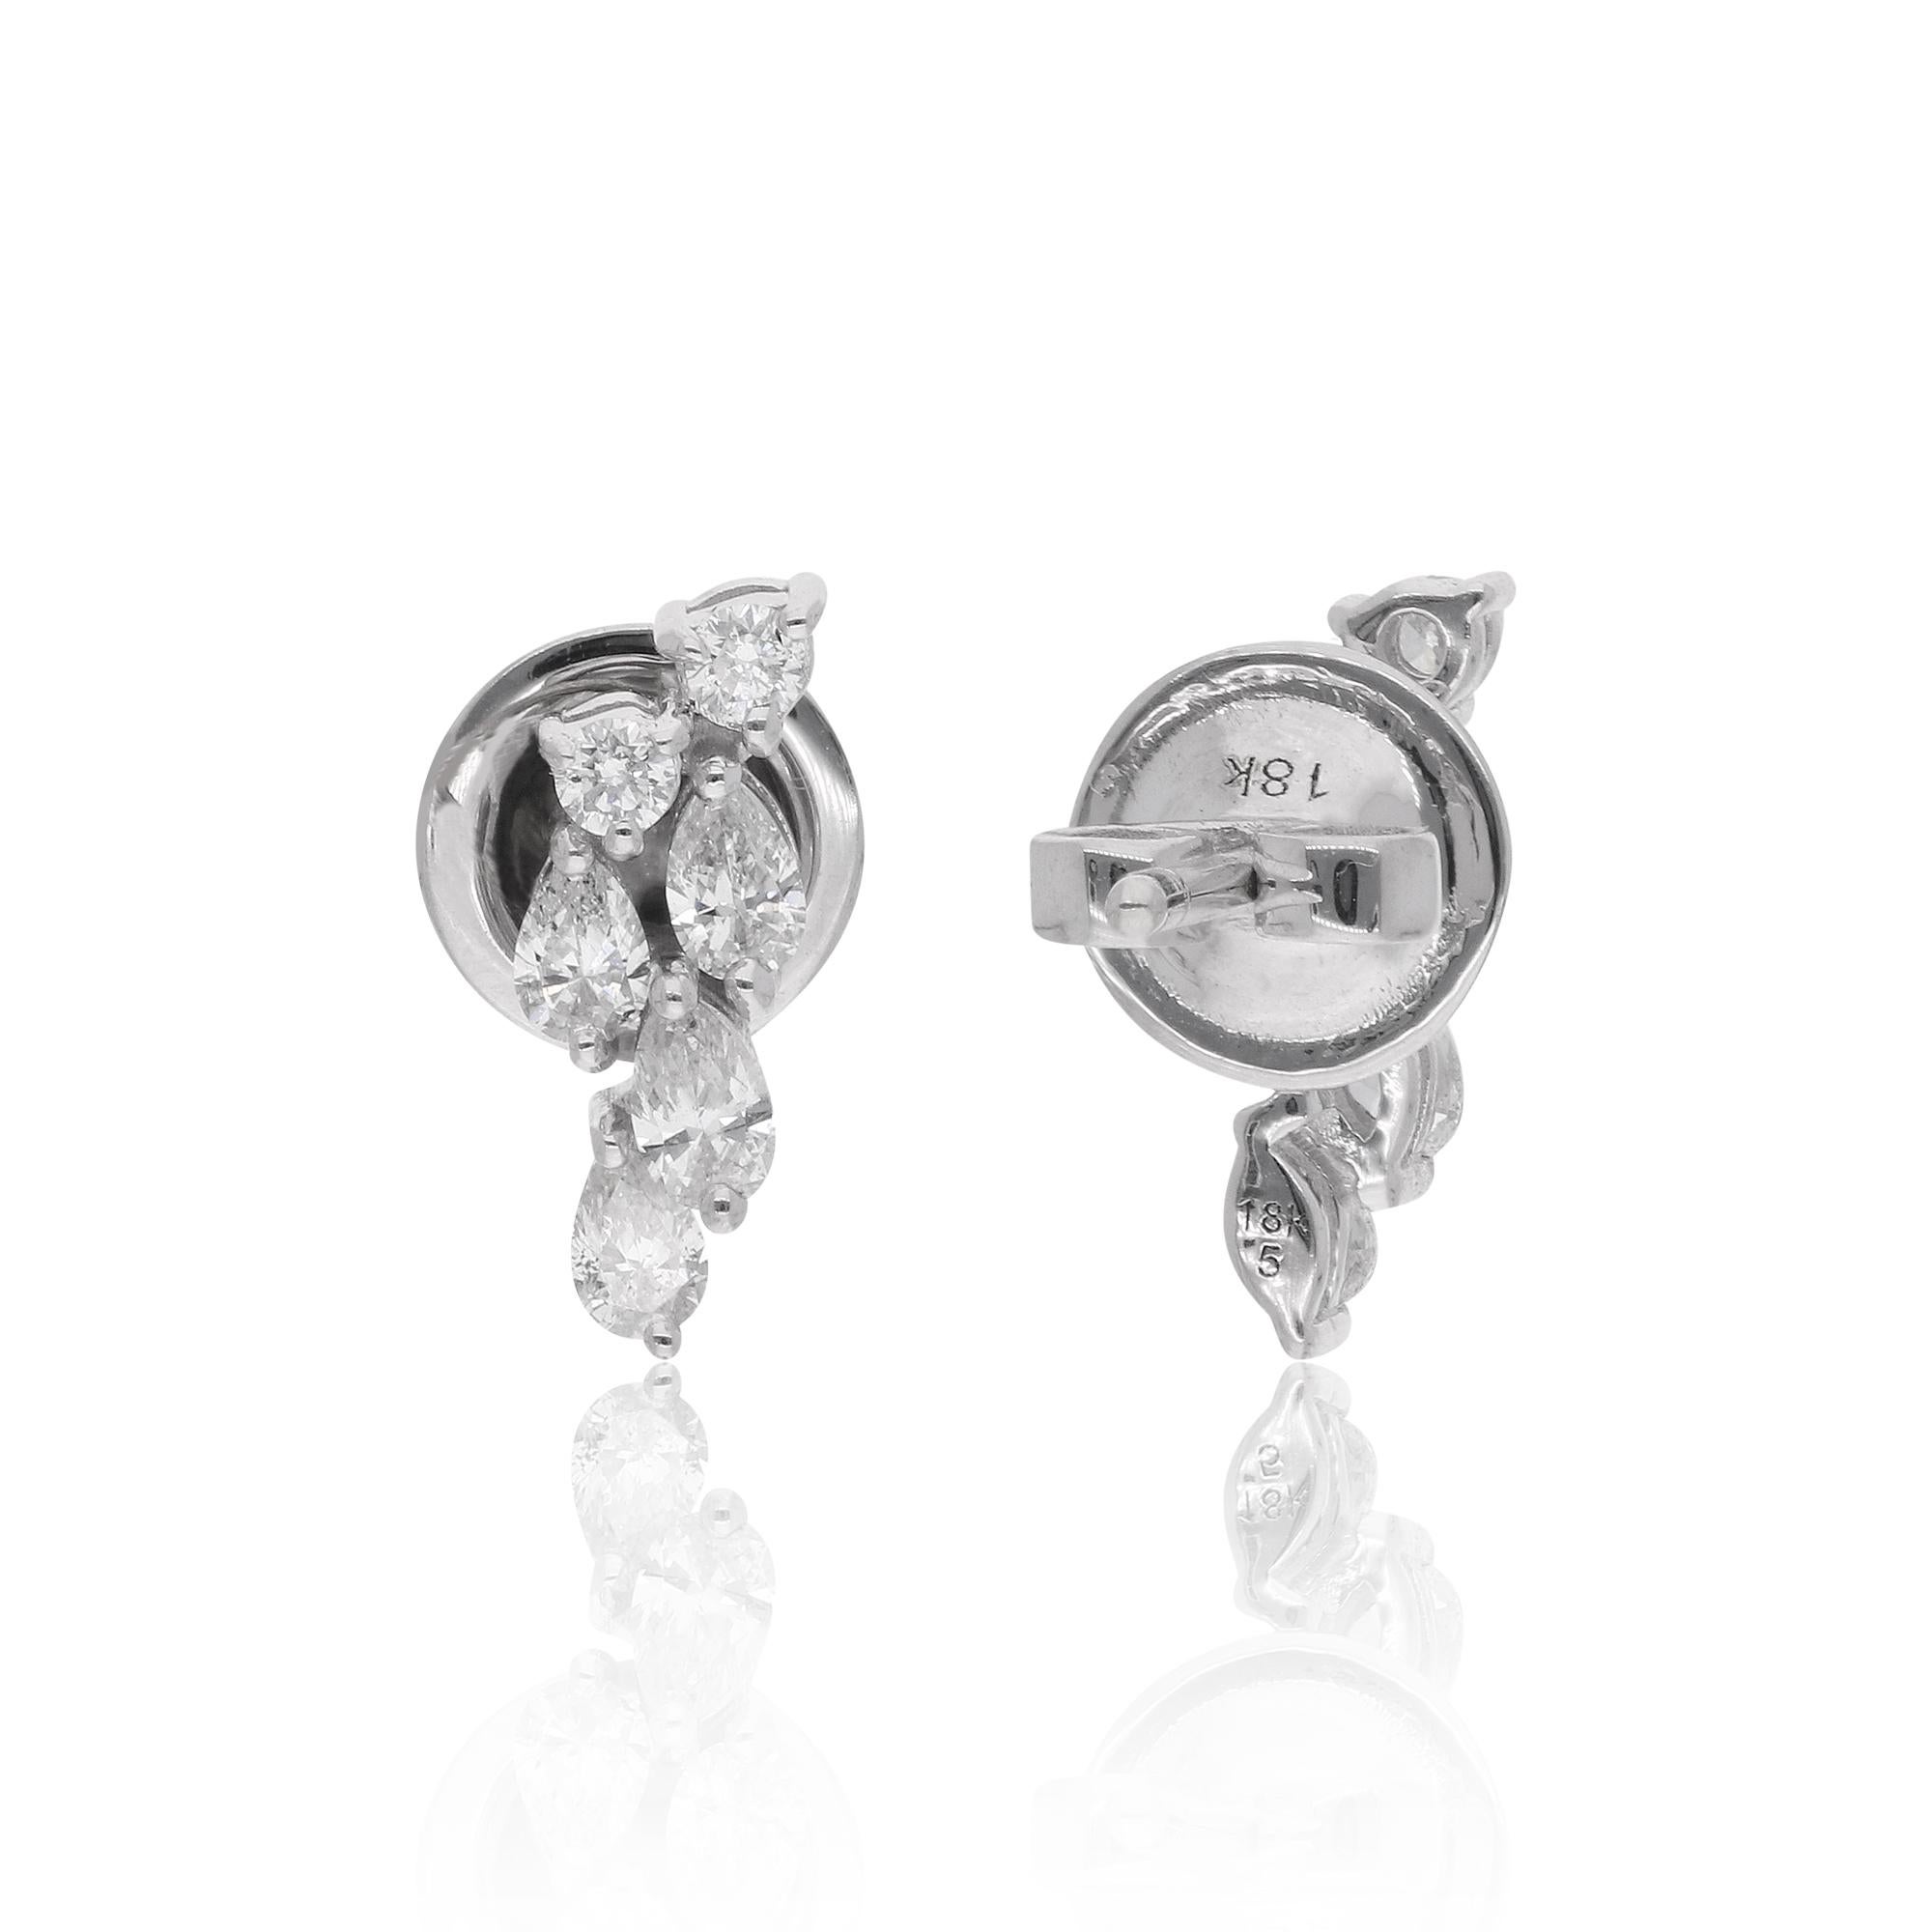 Indulge in the timeless elegance of these exquisite 0.60 Carat Pear & Round Diamond Earrings, crafted with meticulous attention to detail in 18 Karat White Gold. These captivating earrings are a testament to the artistry and sophistication of